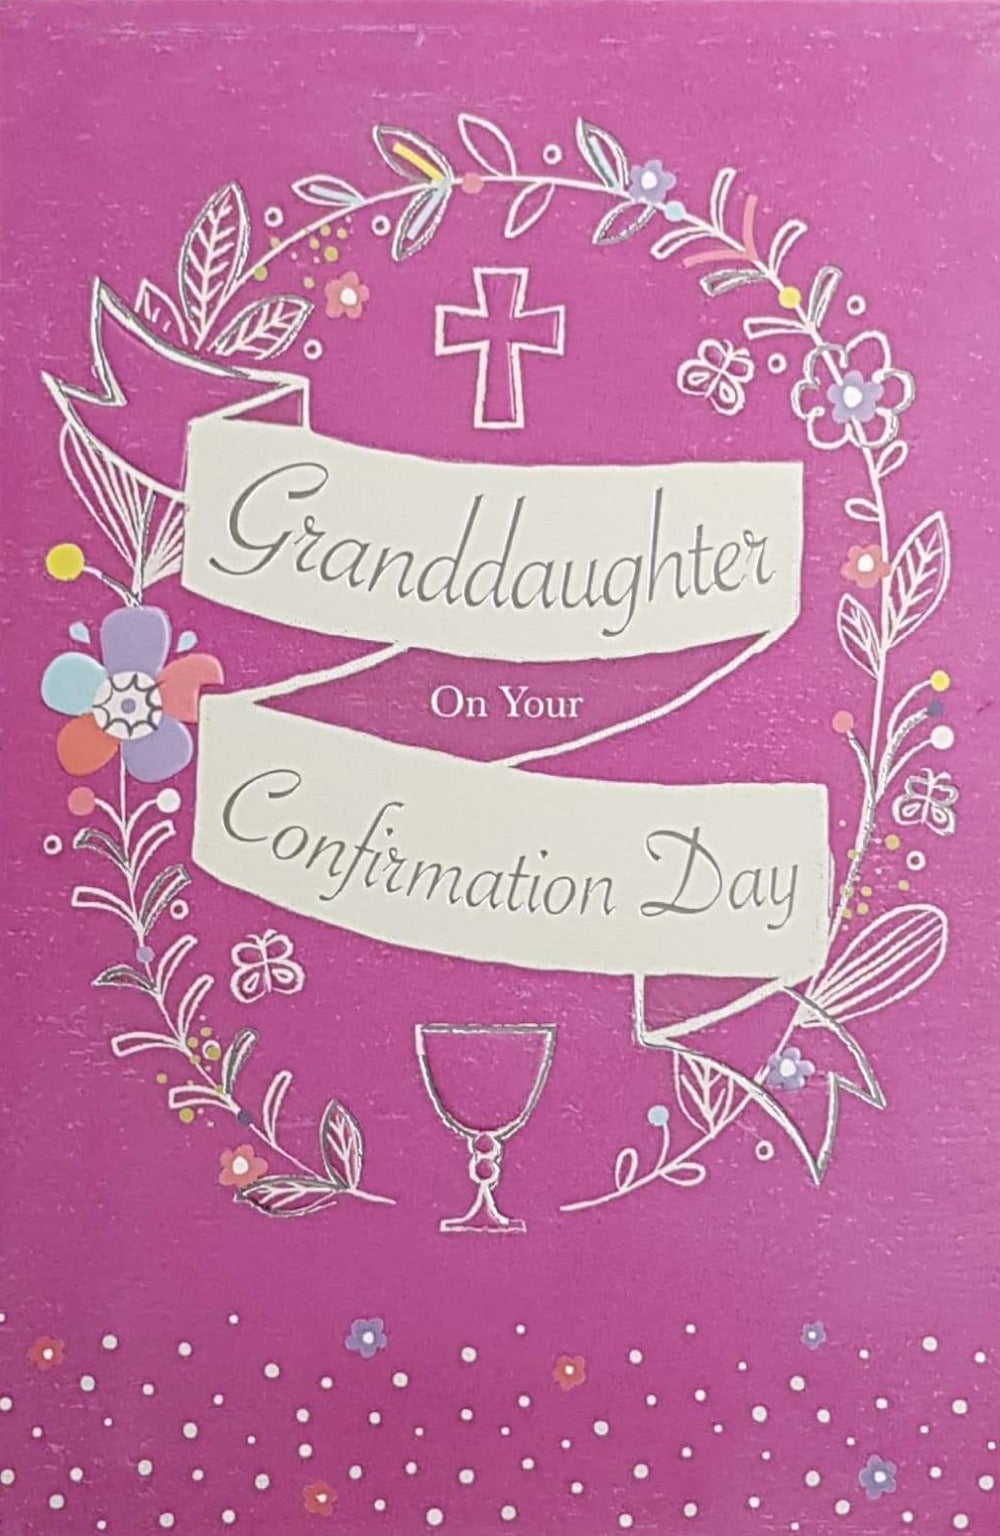 Confirmation Card - Granddaughter / Floral Motive & White Dots